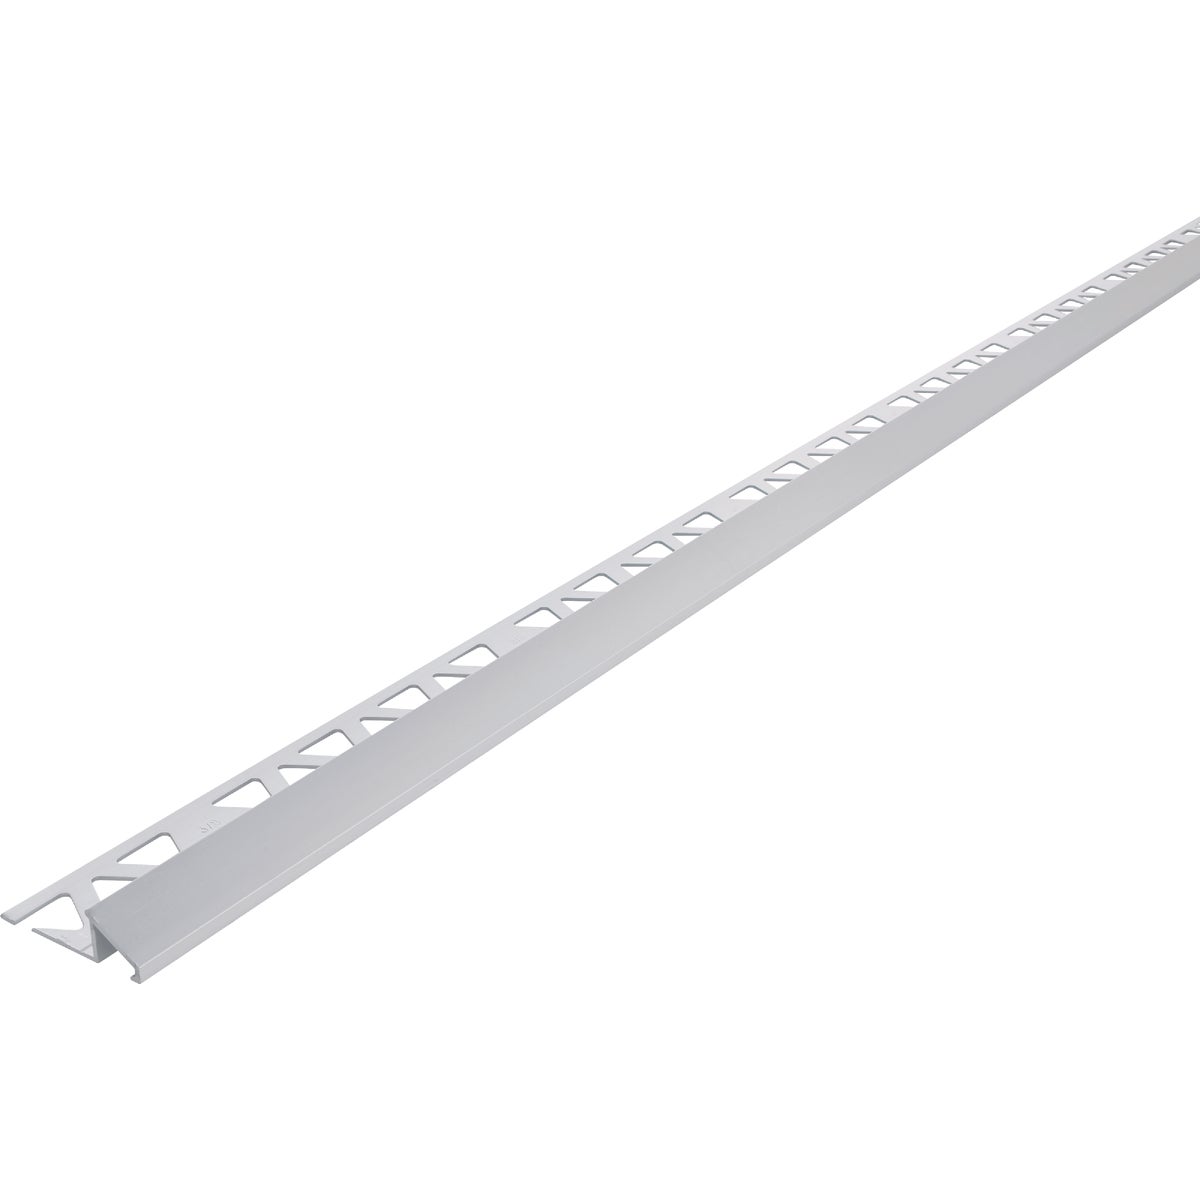 M-D Building Products 3/8 In. x 8 Ft. Satin Clear Anodized Tile Edging Reducer